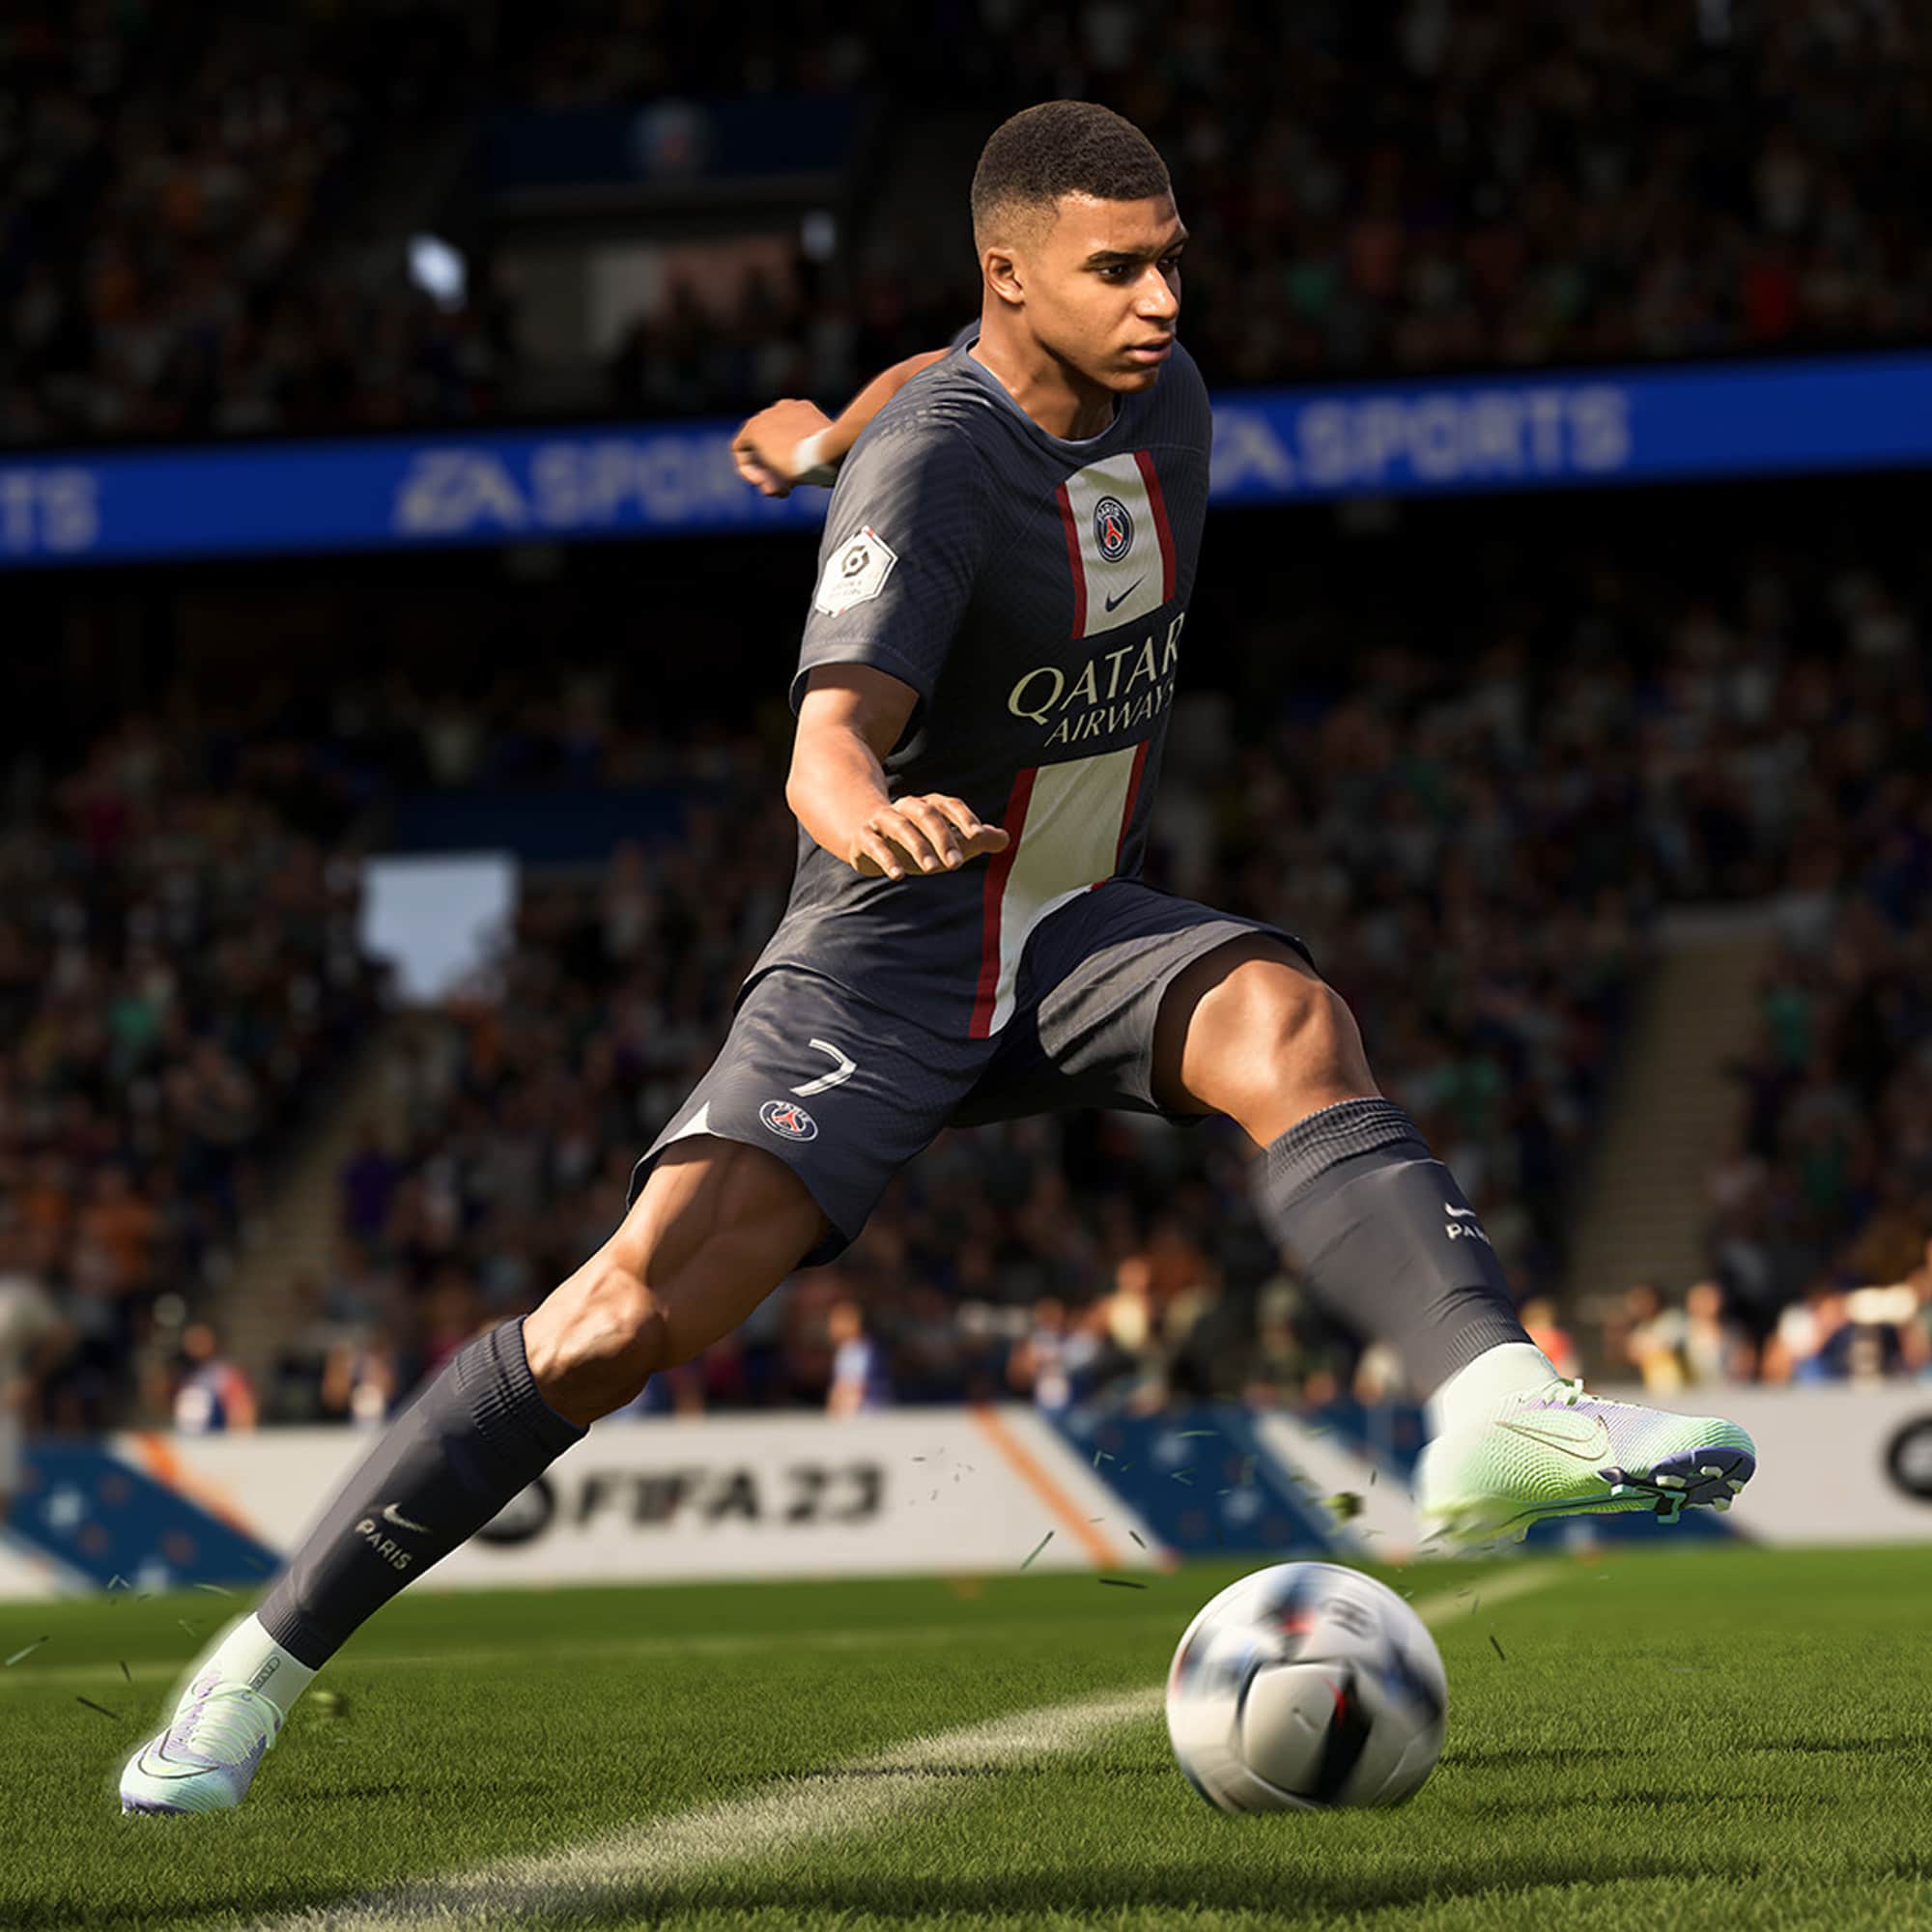 Games The Shop on X: Build your dream squad in FIFA 23 Ultimate